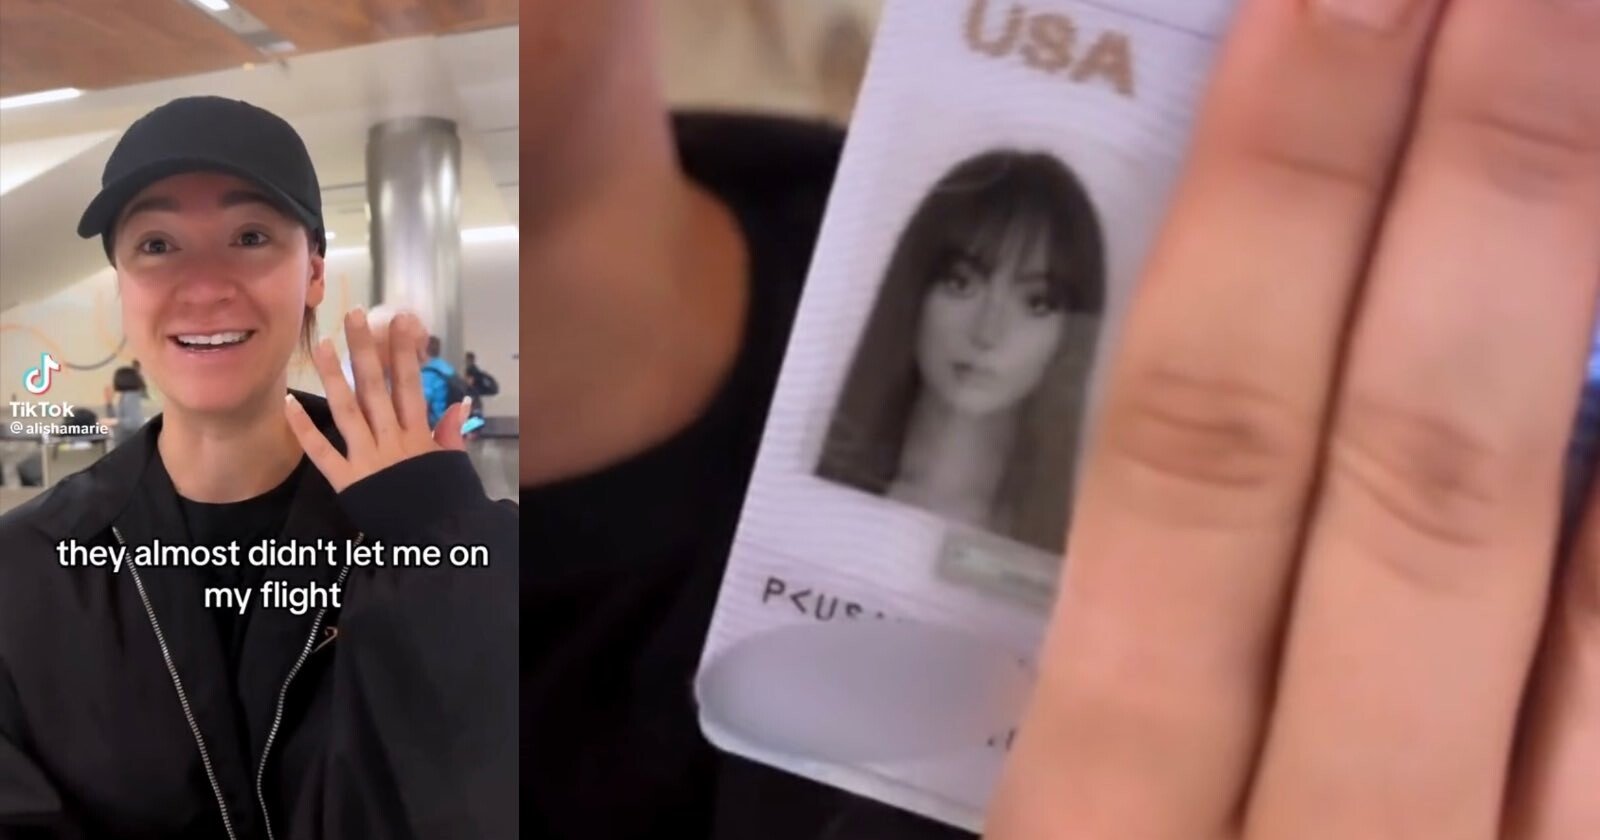  influencer nearly barred from flight because hot passport 